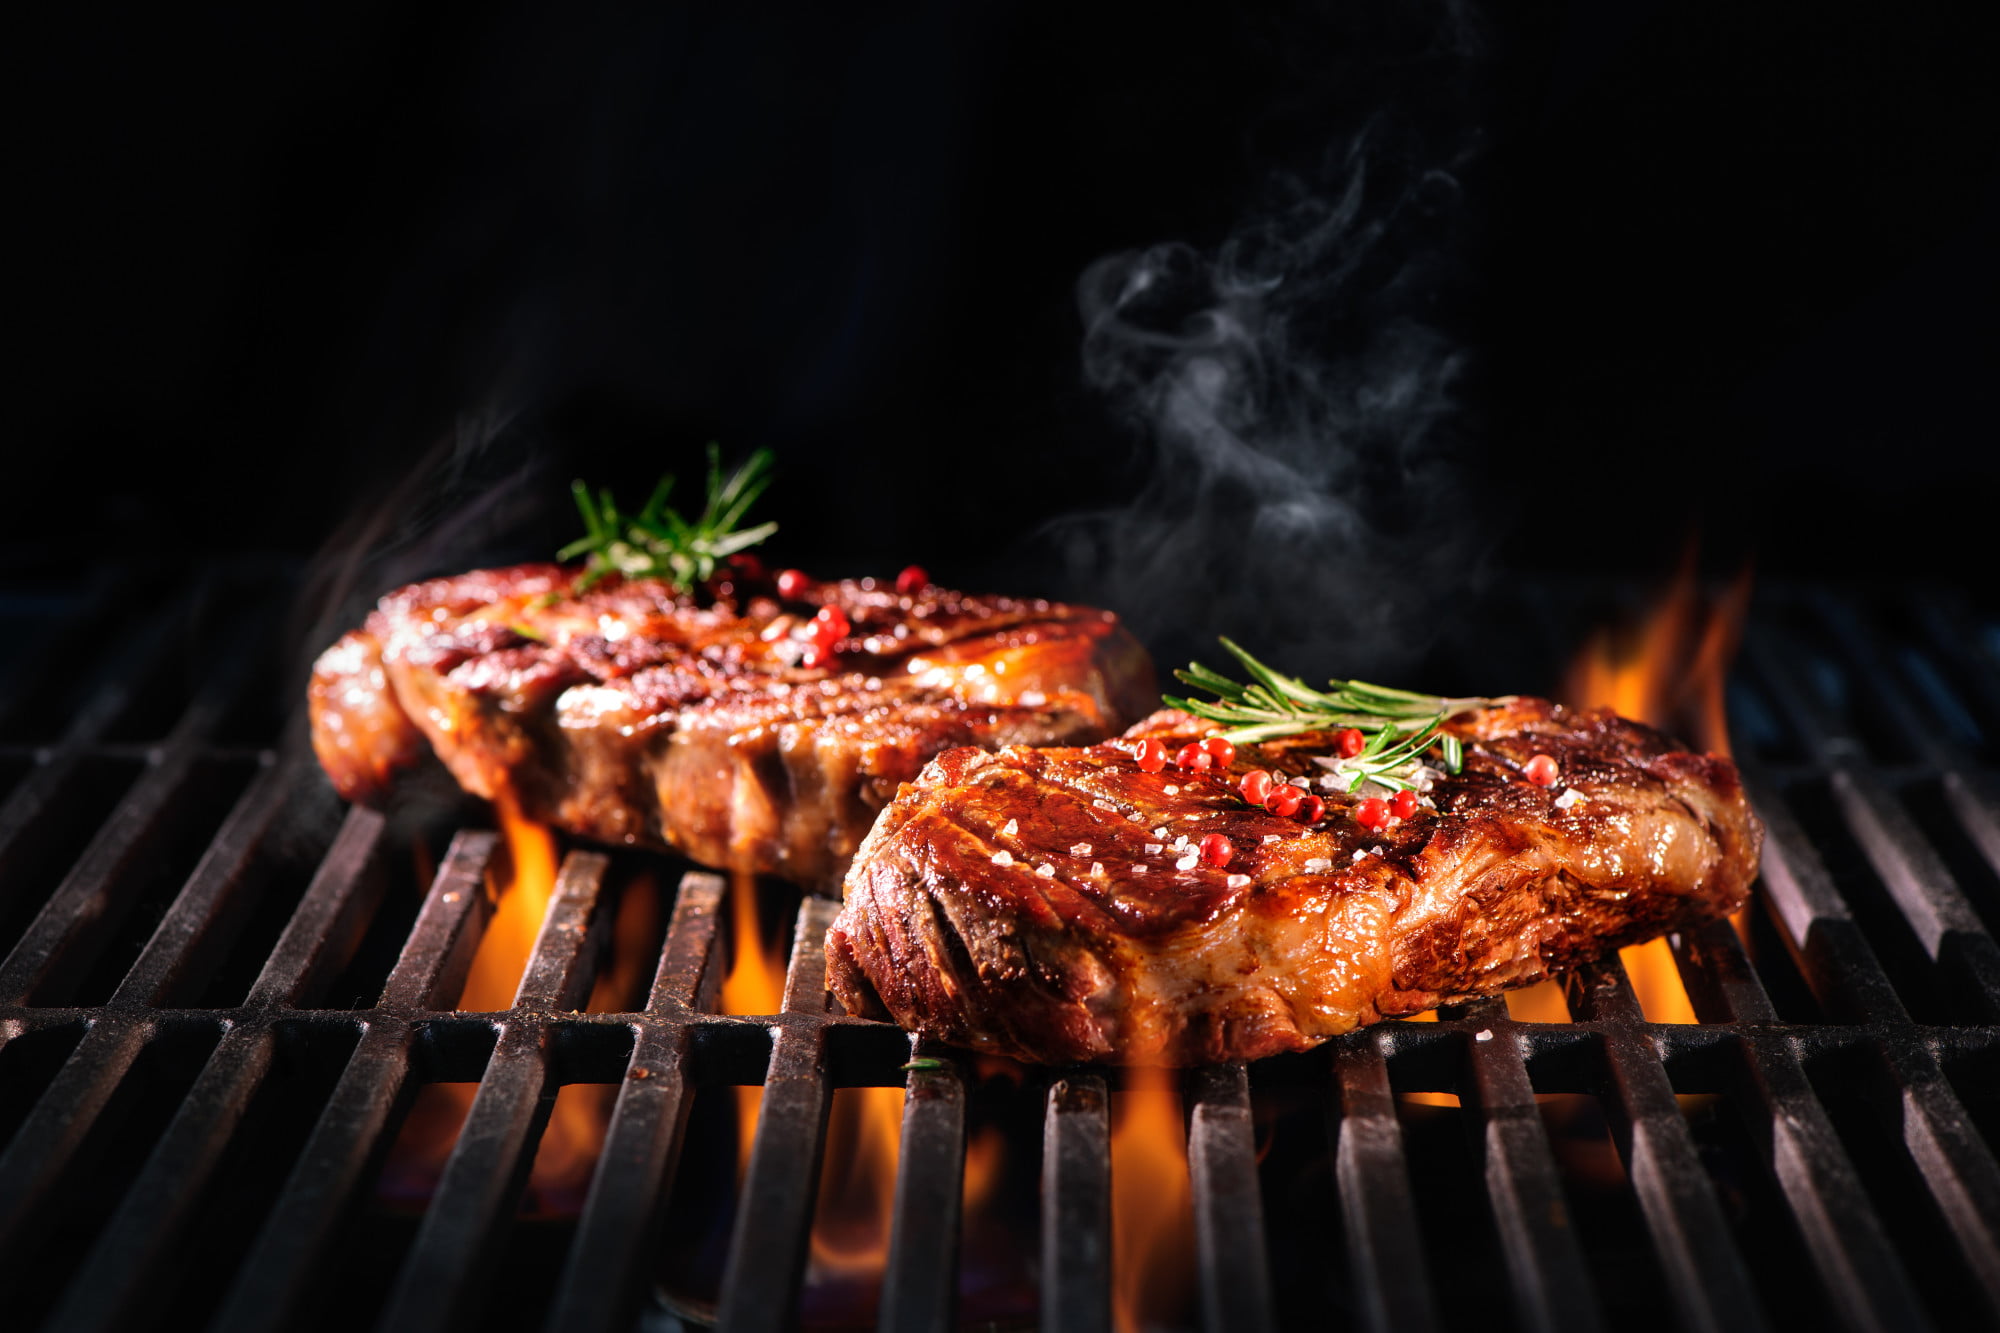 Are you looking for the right grill for your barbequing needs? Click here for a guide to the different types of grills to find the right option for you.